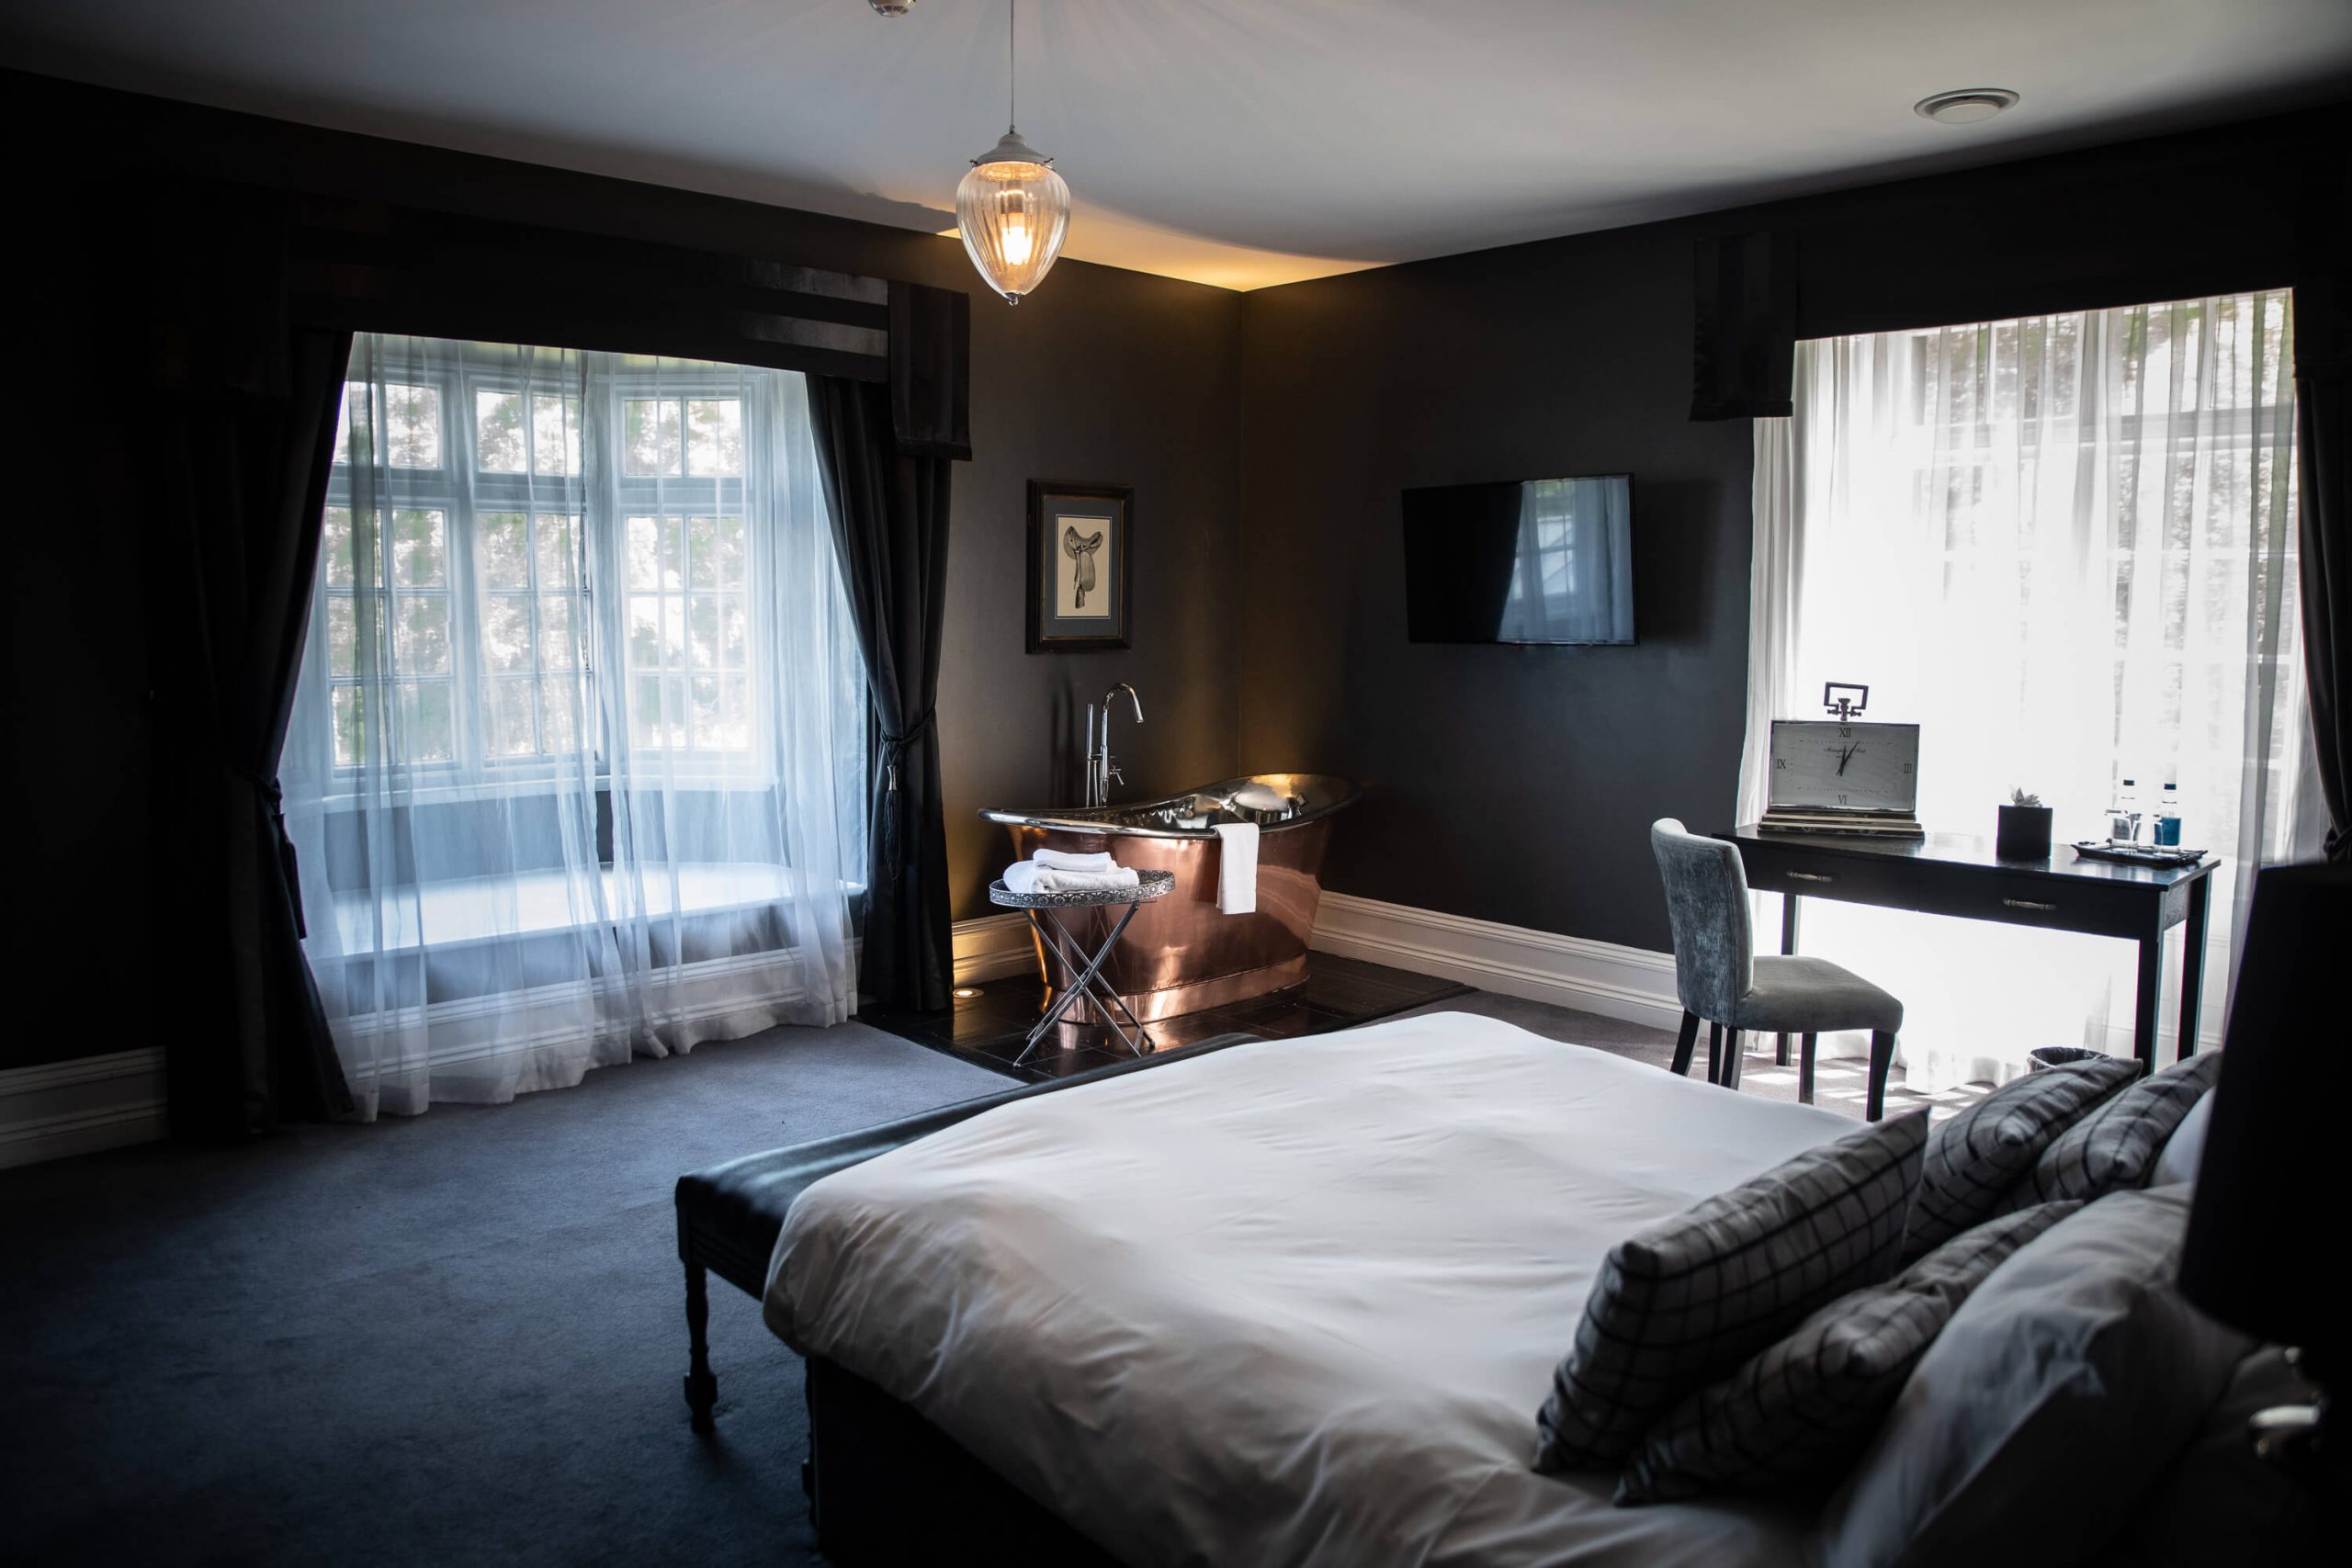 Guest room at Swynford Manor with monochrome decor showing copper roll top bath and teo windows overlooking the gardens